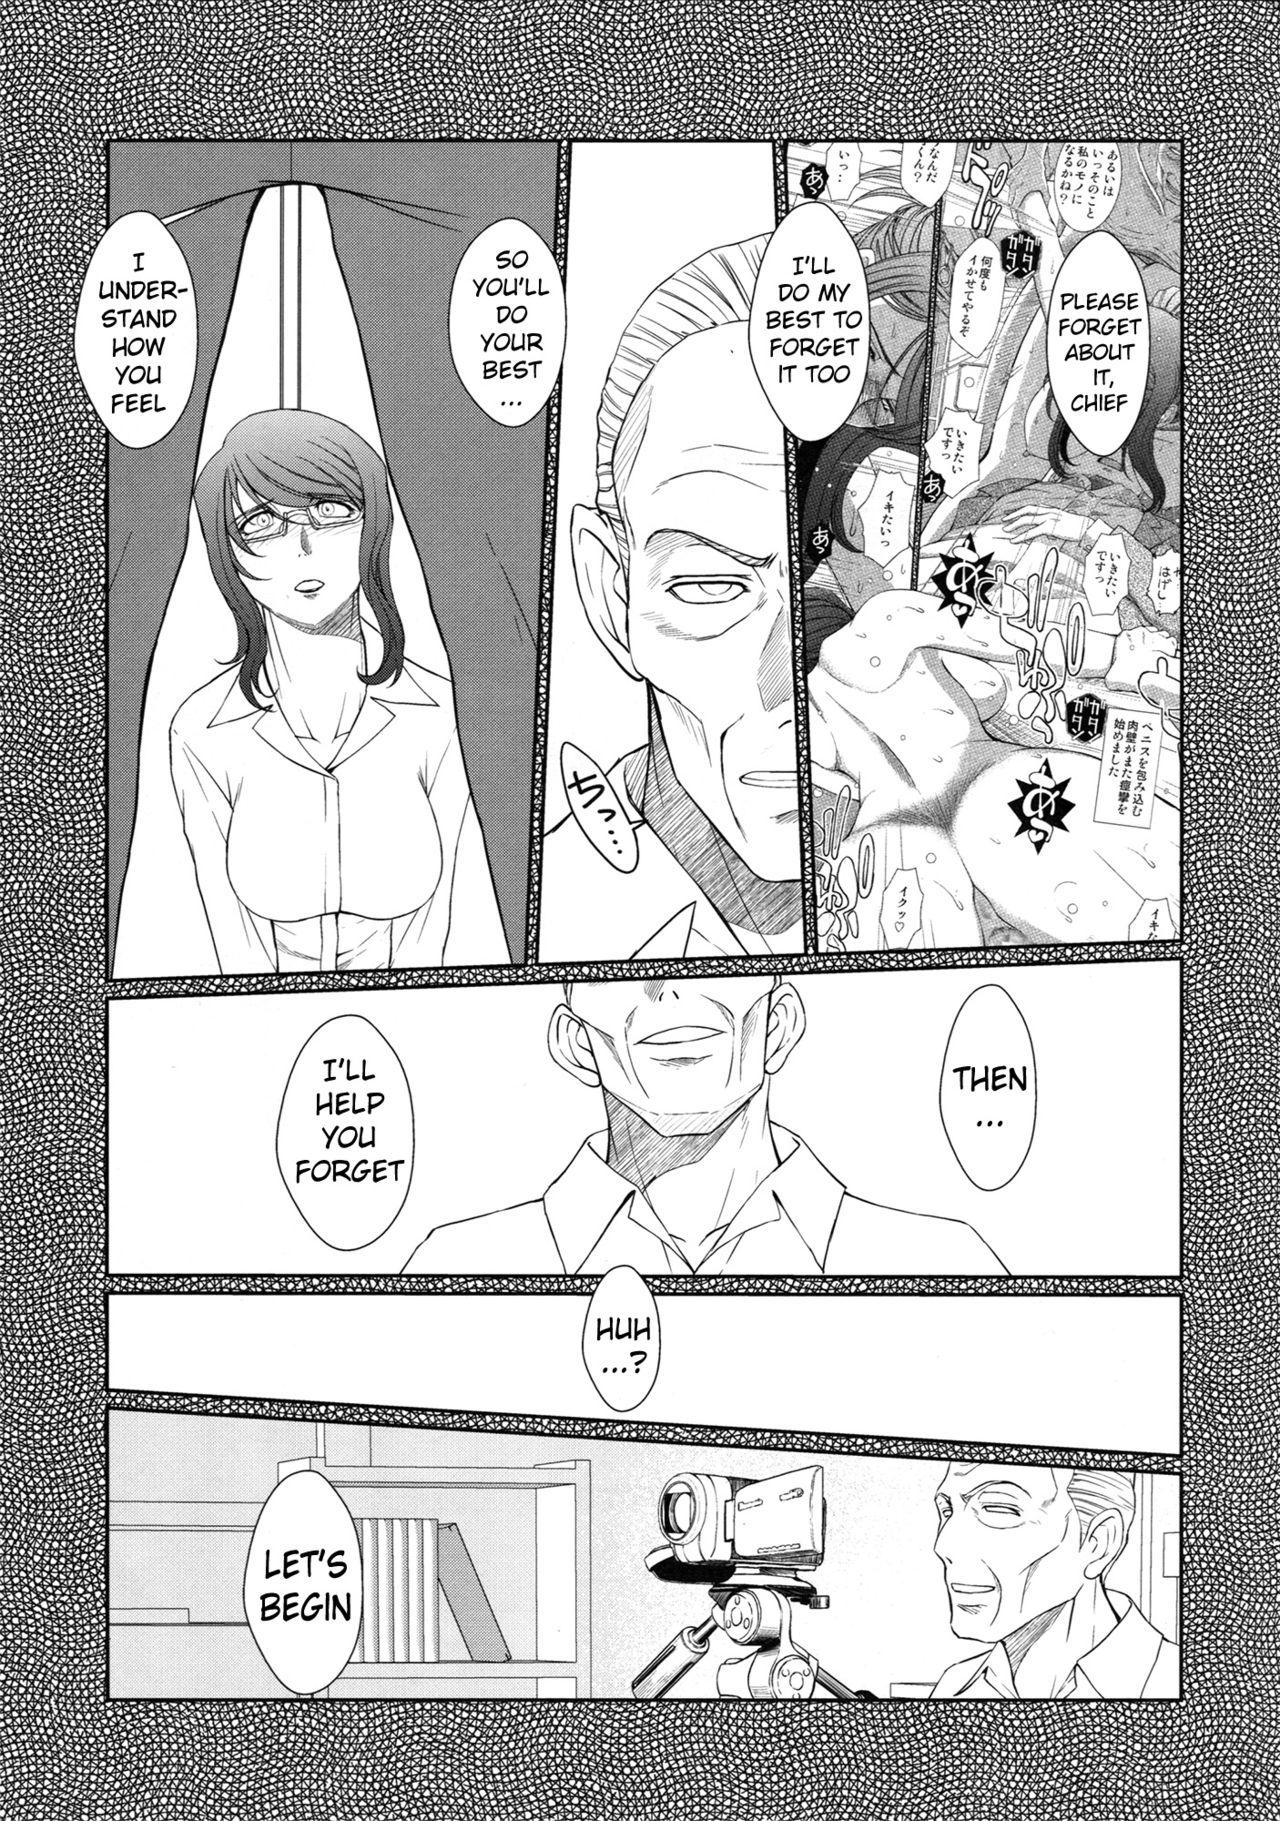 Orgame Zoku Akai Boushi no Onna - Woman with a red cap - Kyuujou lovers Stepbrother - Page 4